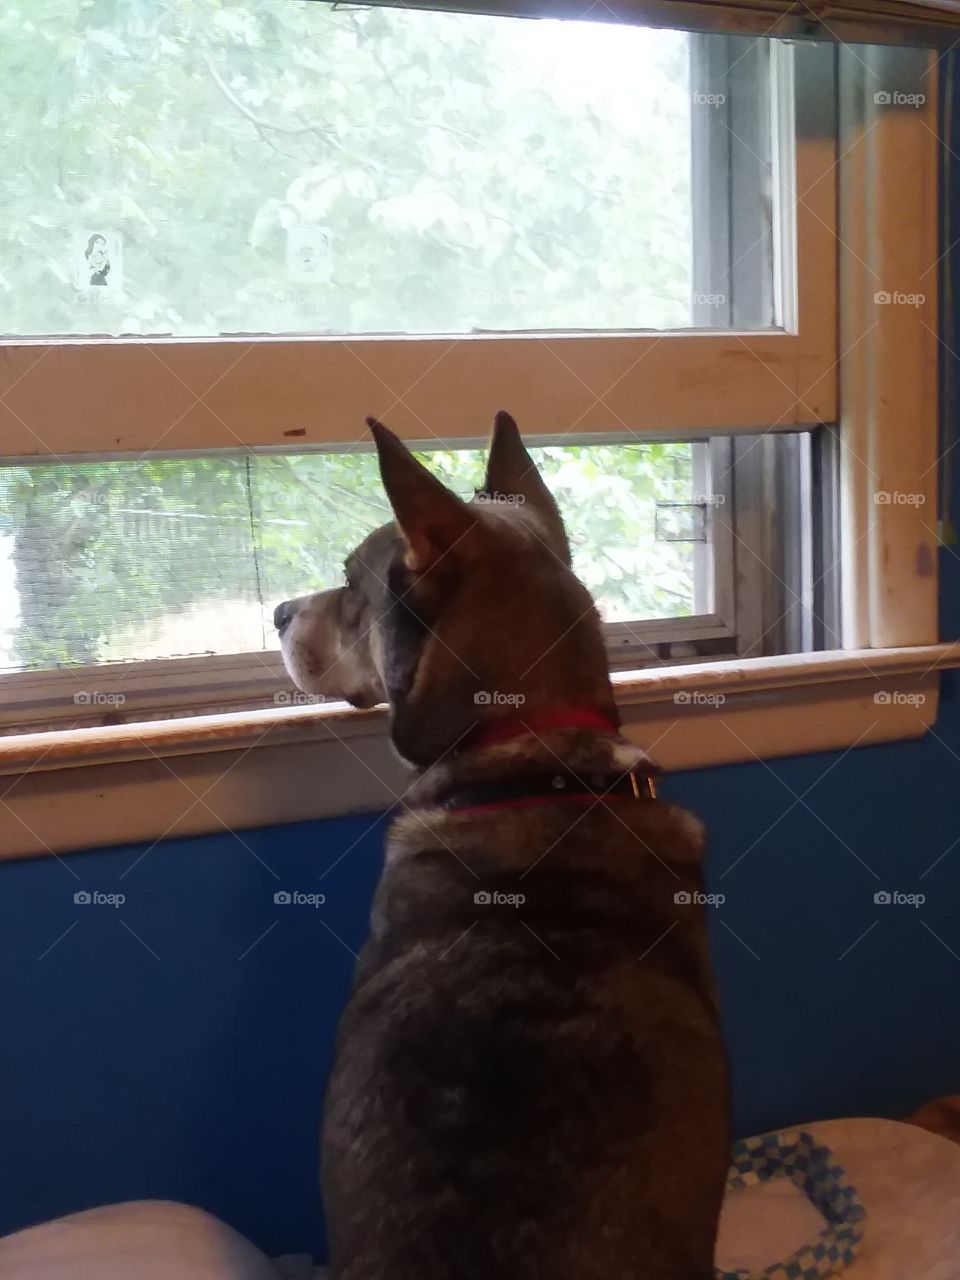 Badit is looking for the great outdoors and watching the squirrels. Watching the world go by.